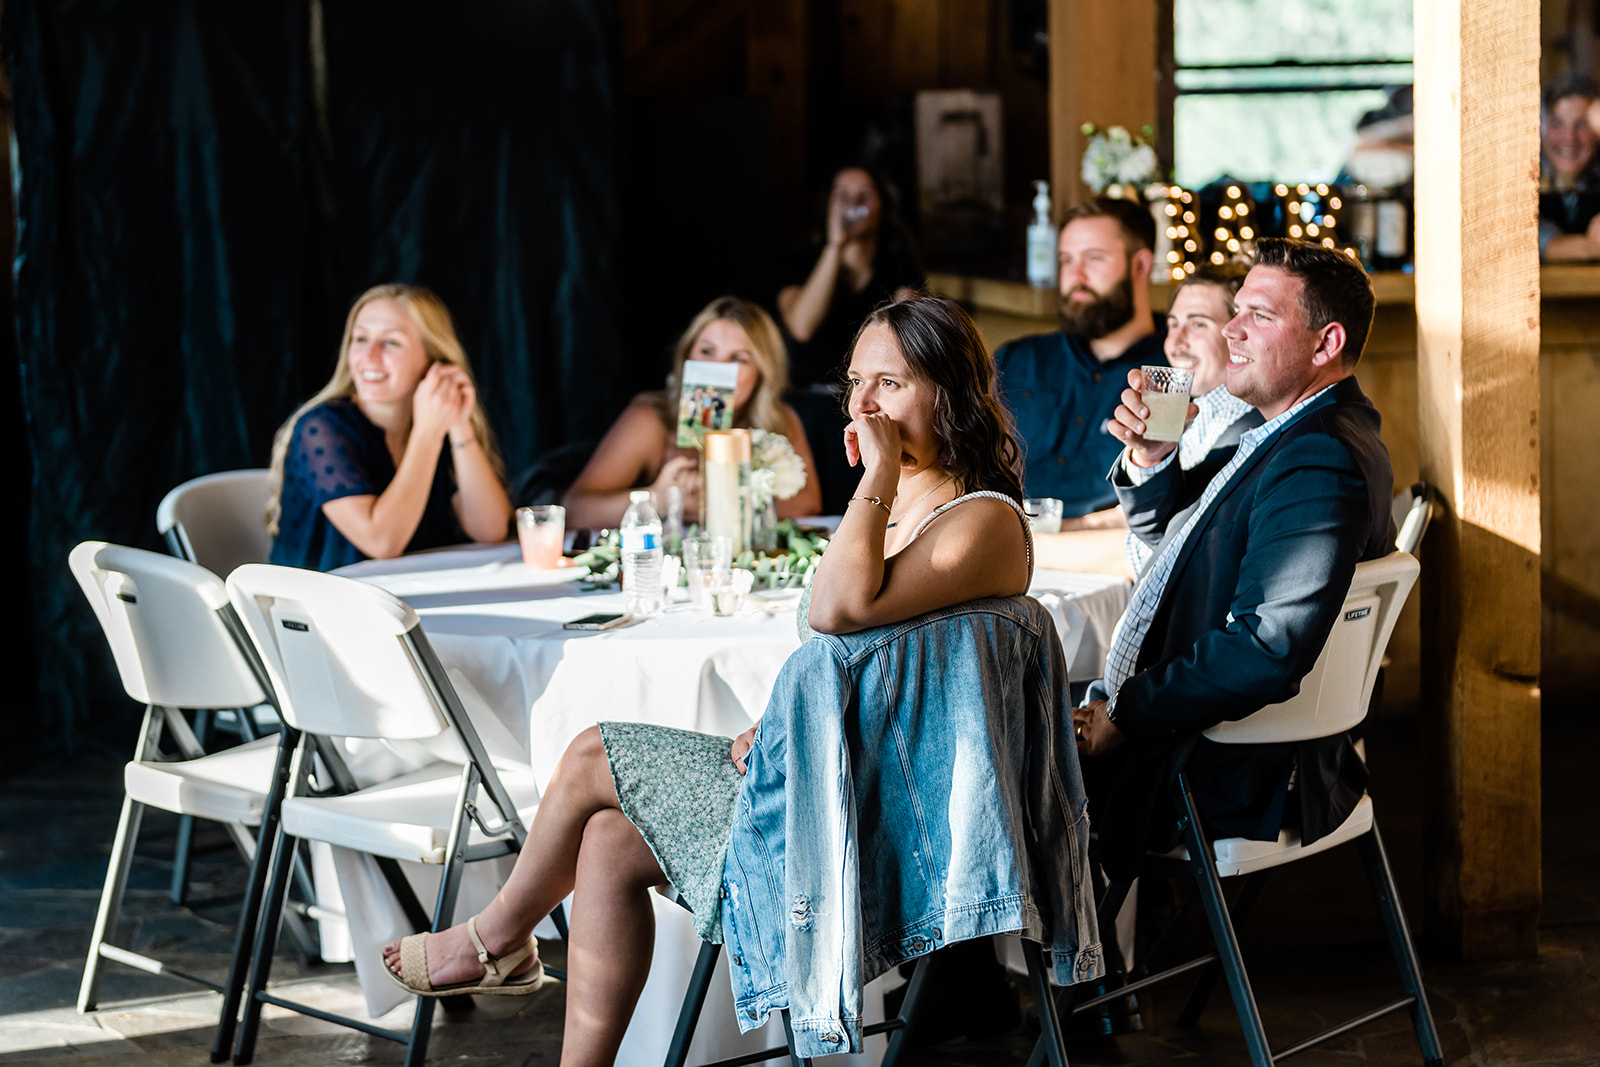 Guests at a Cattle Barn Wedding